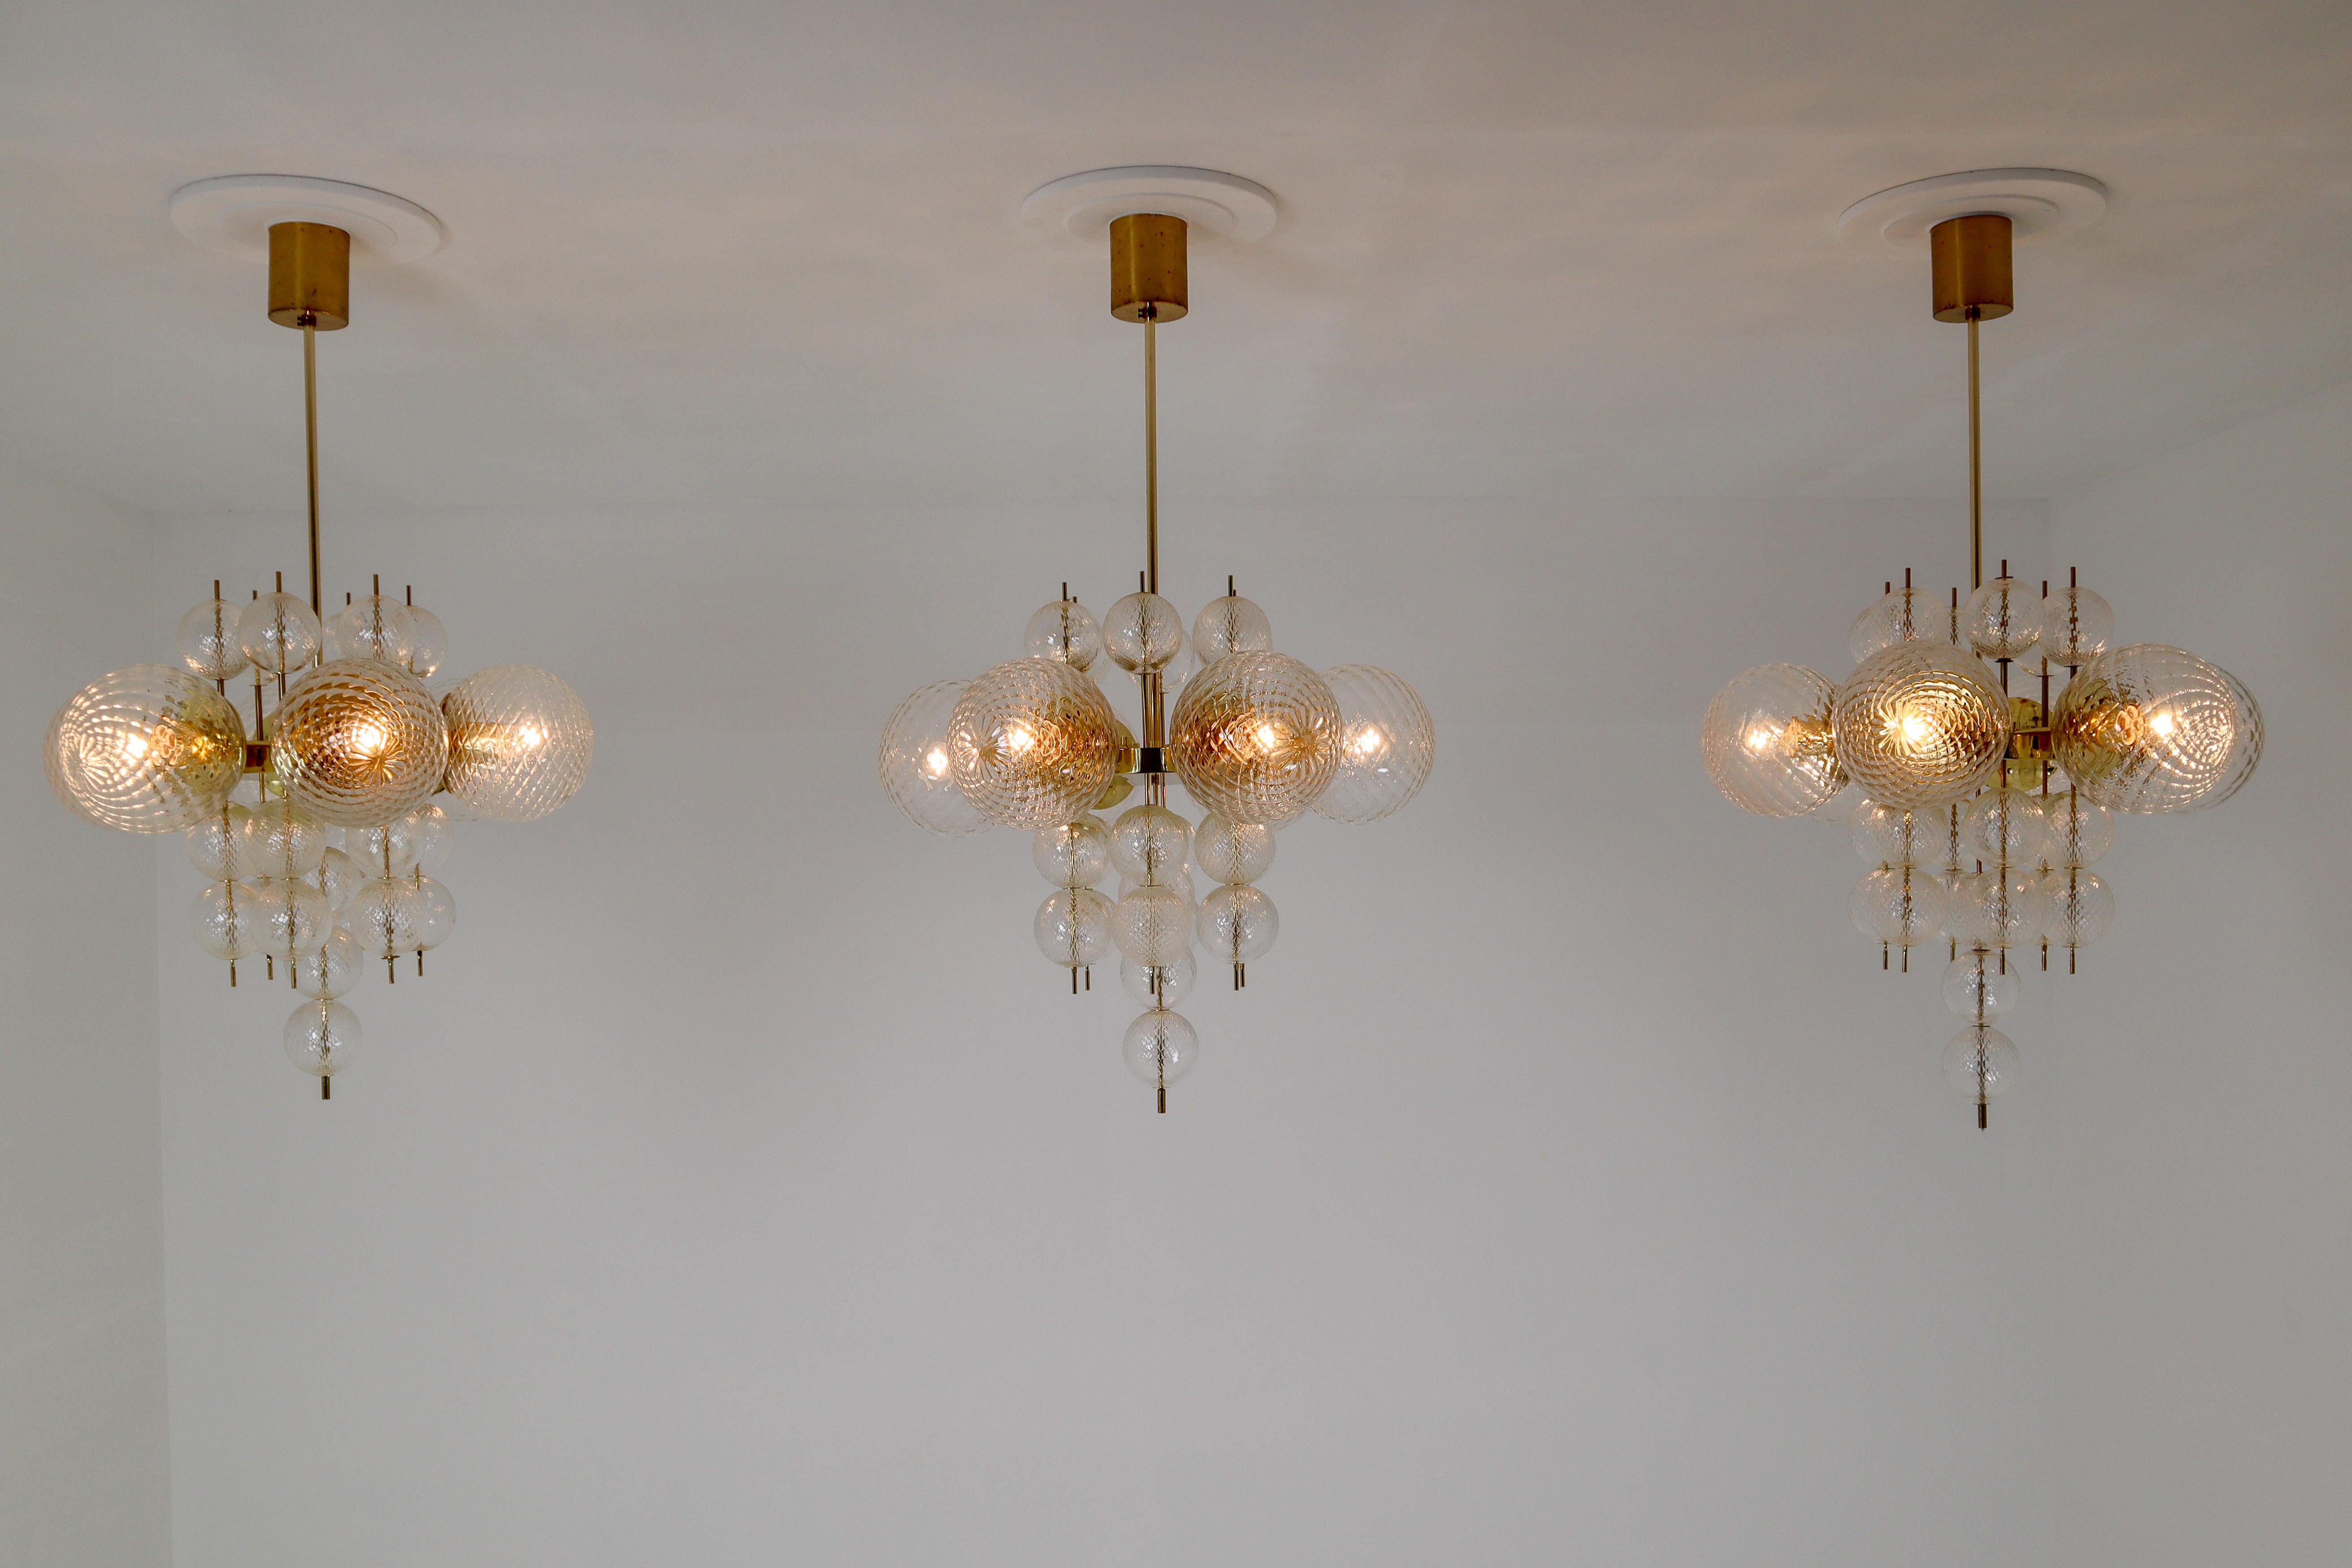 This set of three brass chandeliers was produced by Fa. Preciosa in Kamenicky Senov, Czechoslovakia in the 1970s. A spirited and chic design set of three chandeliers with brass fixture and art-glass. The chandelier with brass frame consist of six